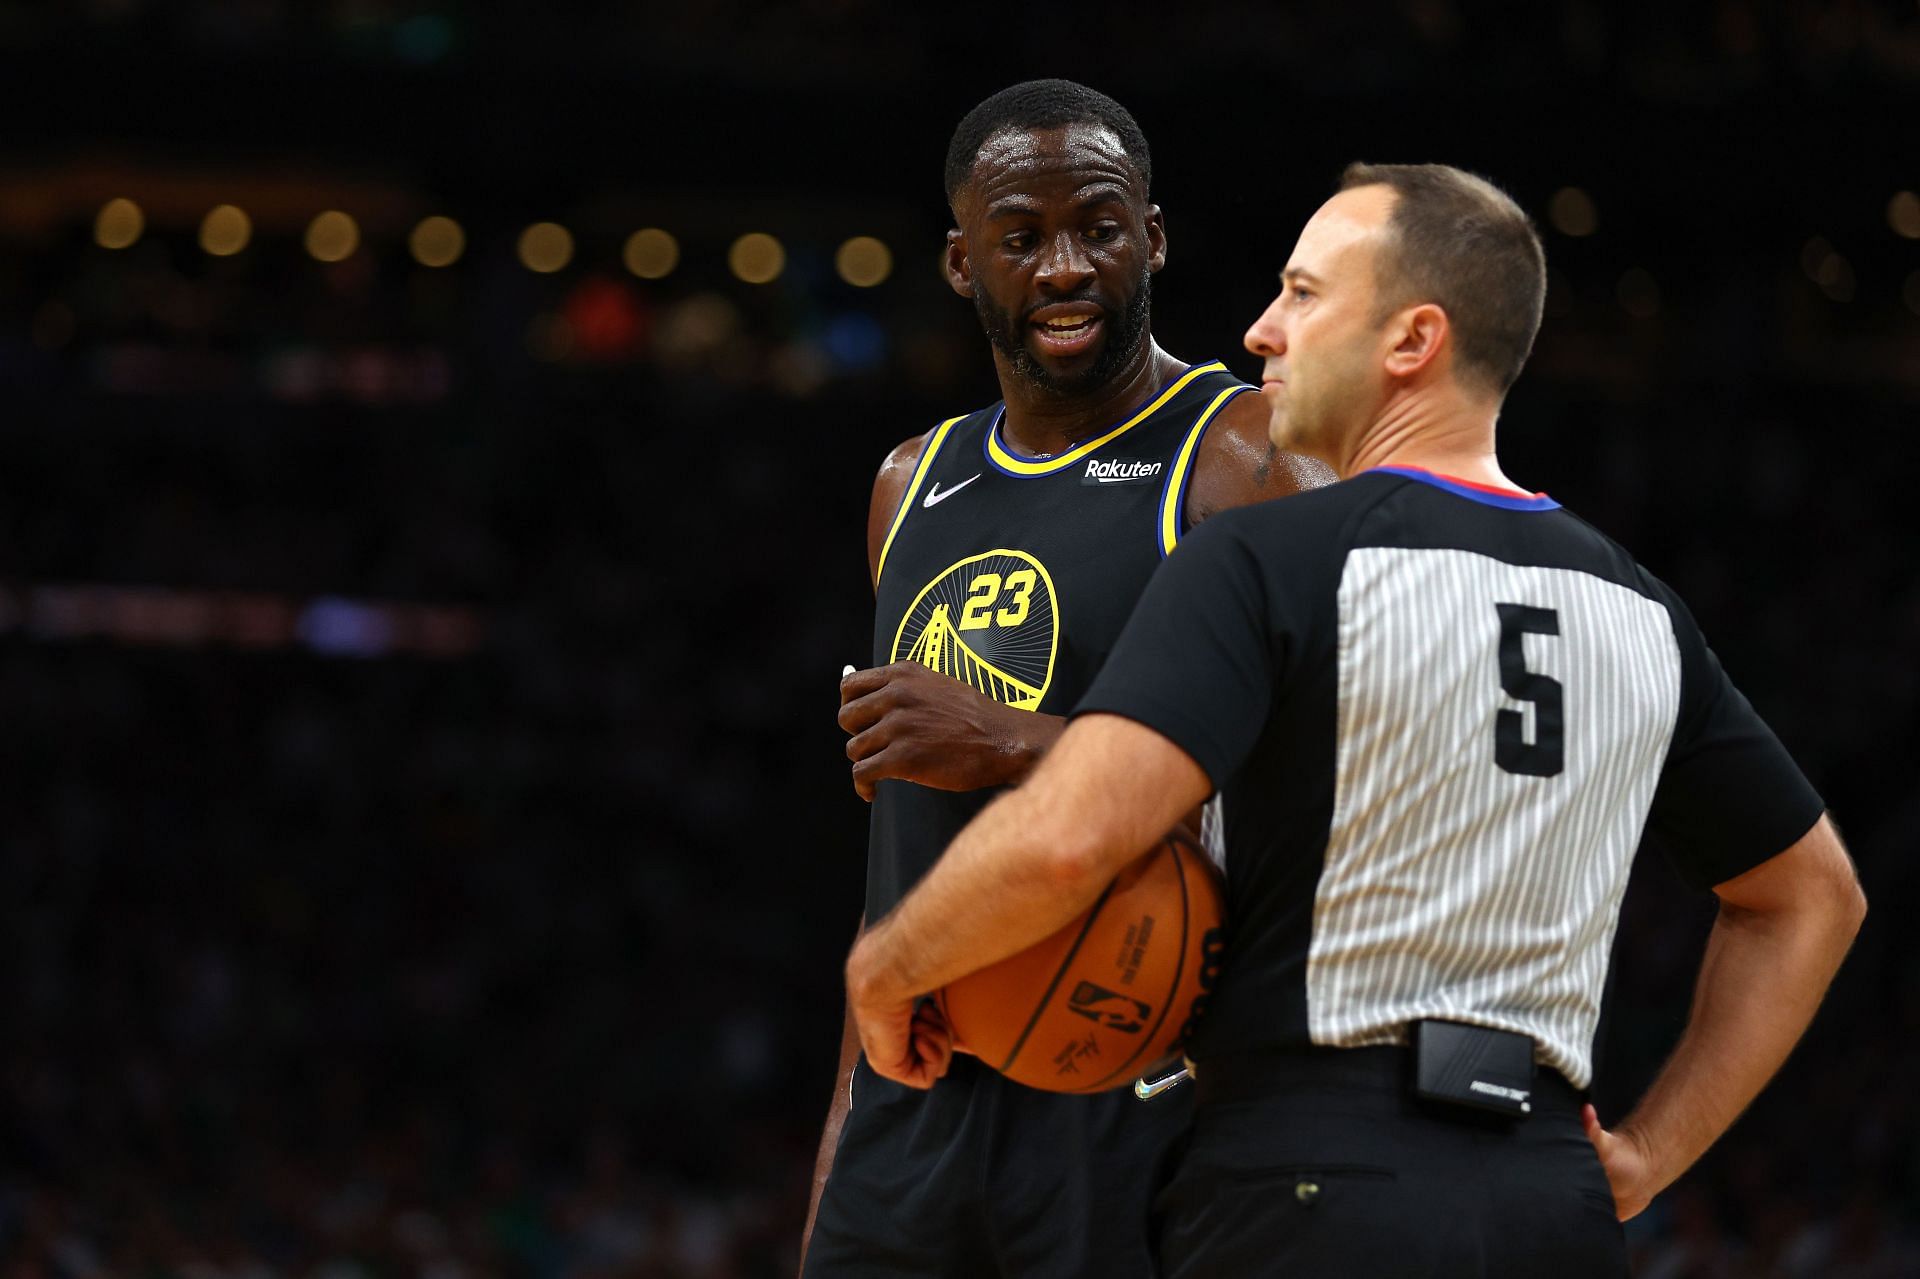 Draymond Green talking to a referee during the 2022 NBA Finals - Game 4